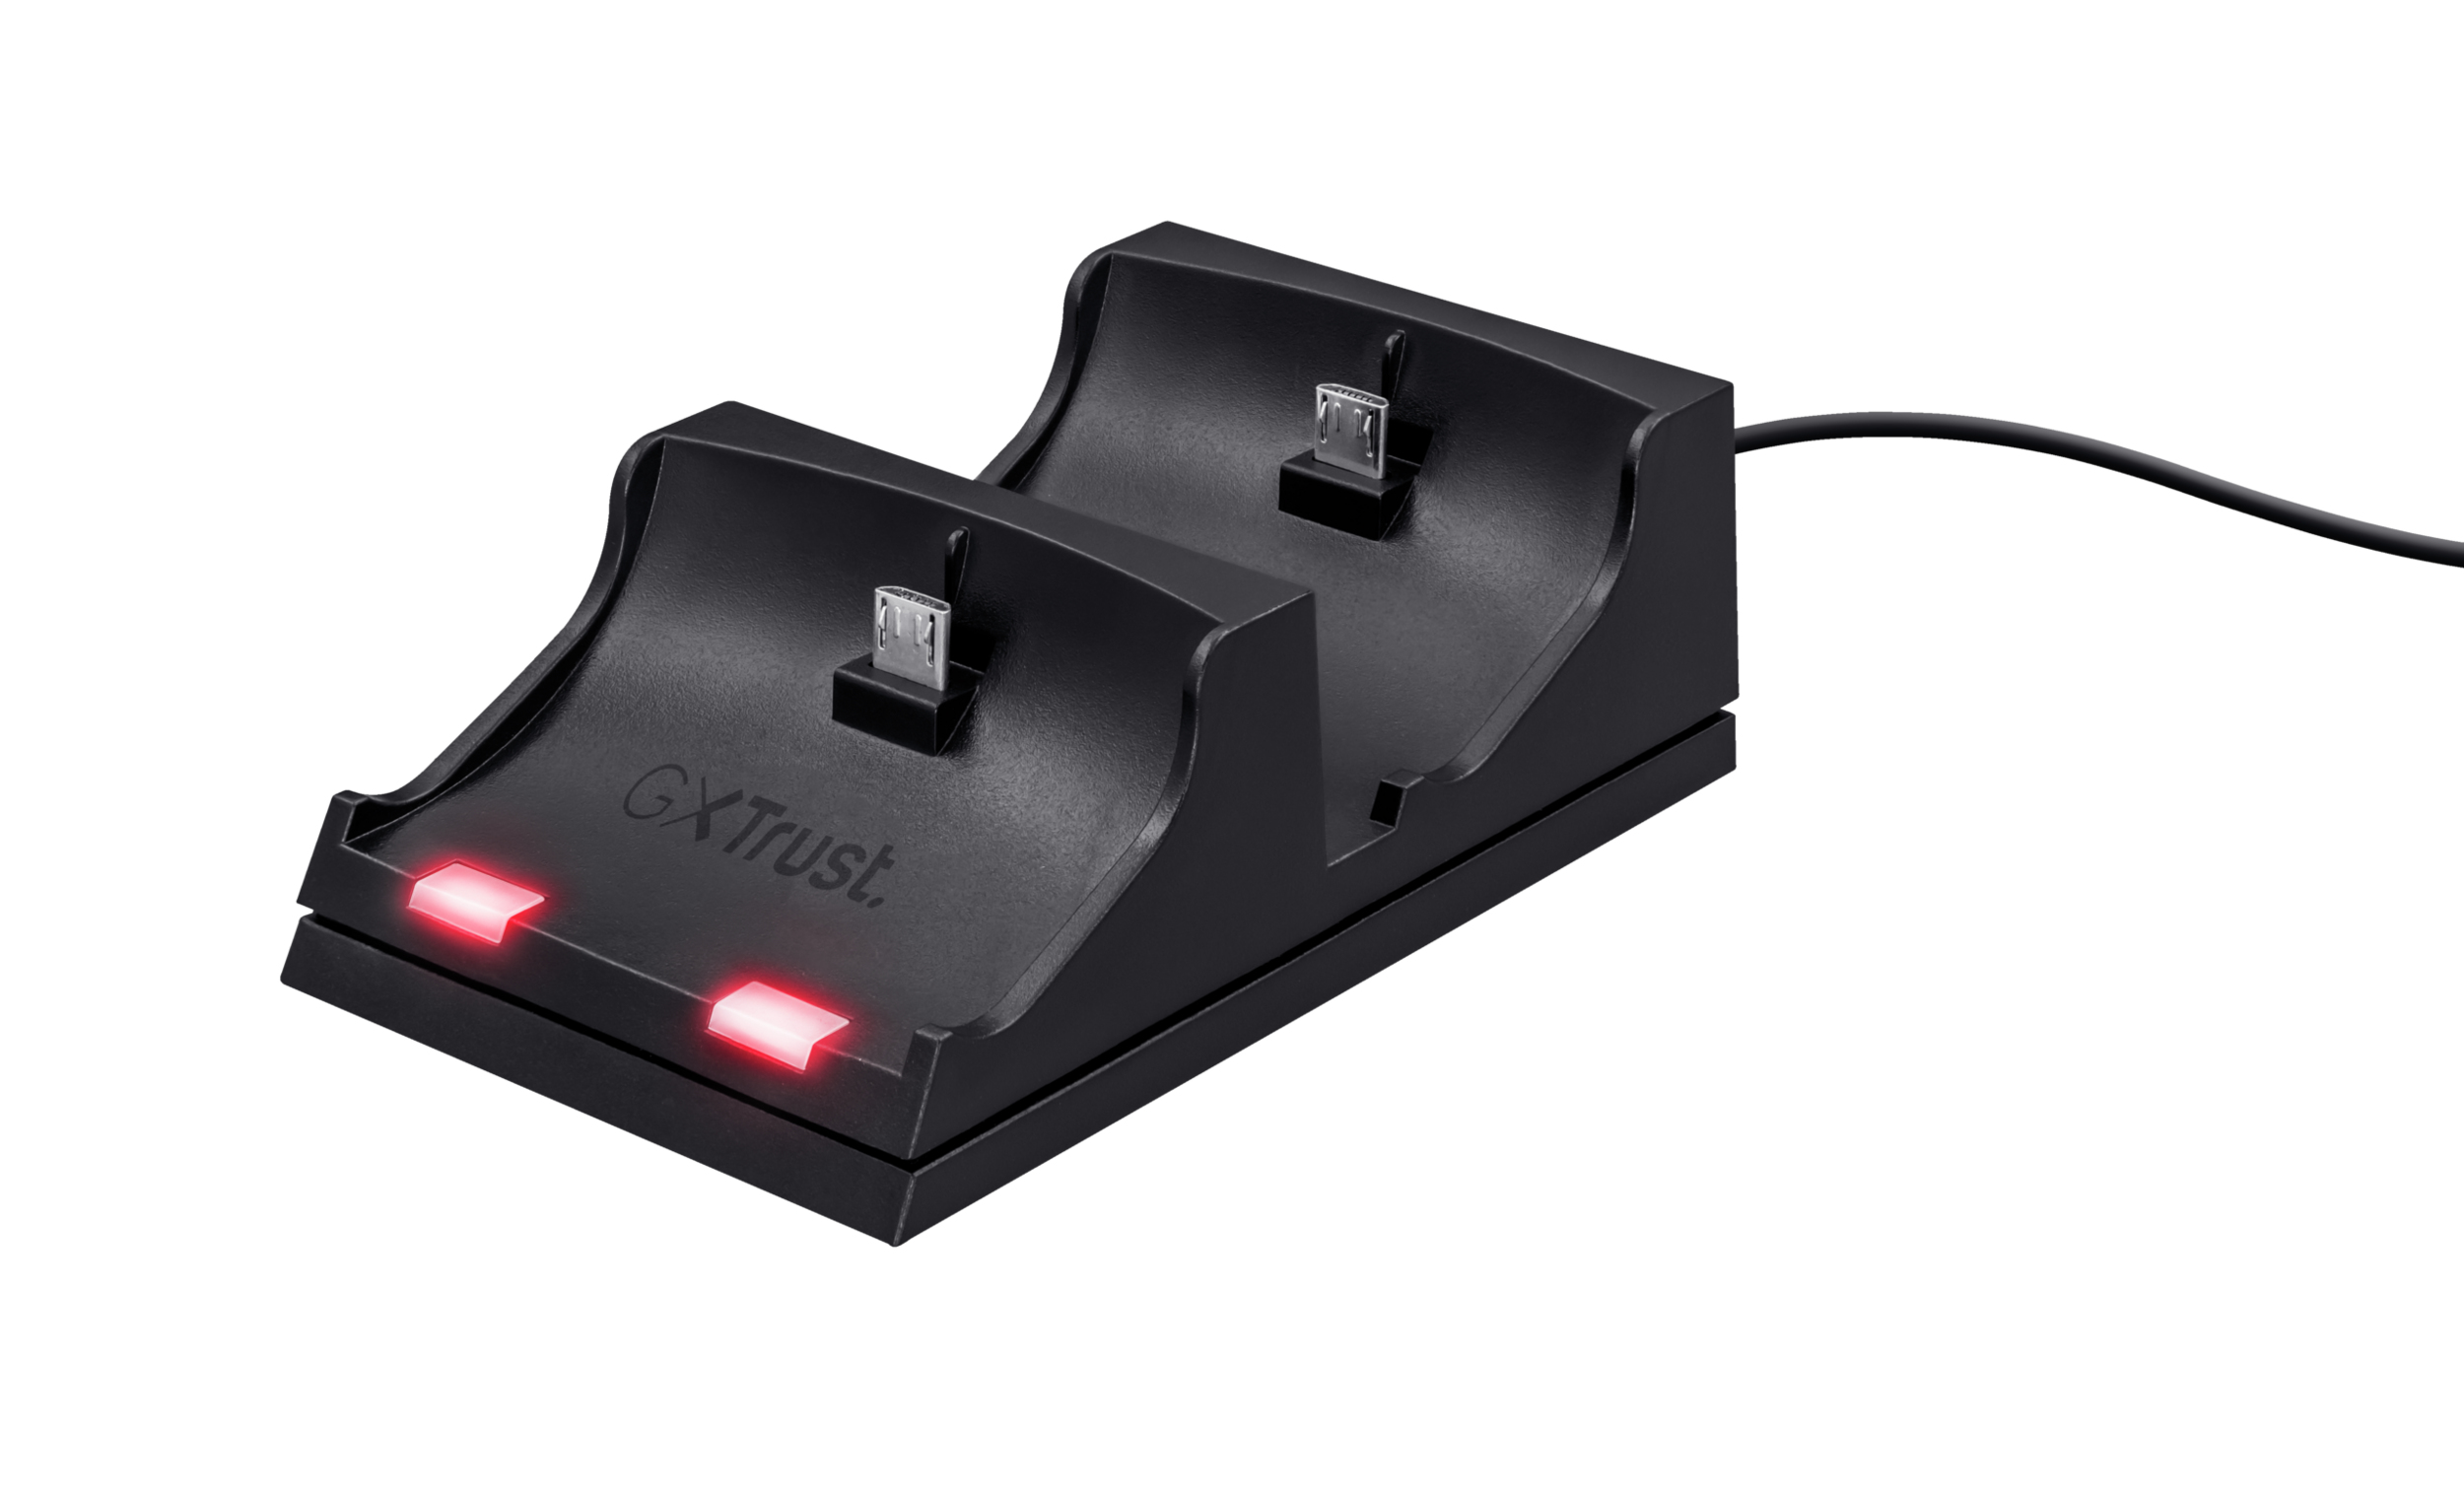 Trust Gxt235 Duo Charge Dock Ps4 21681 - NA01